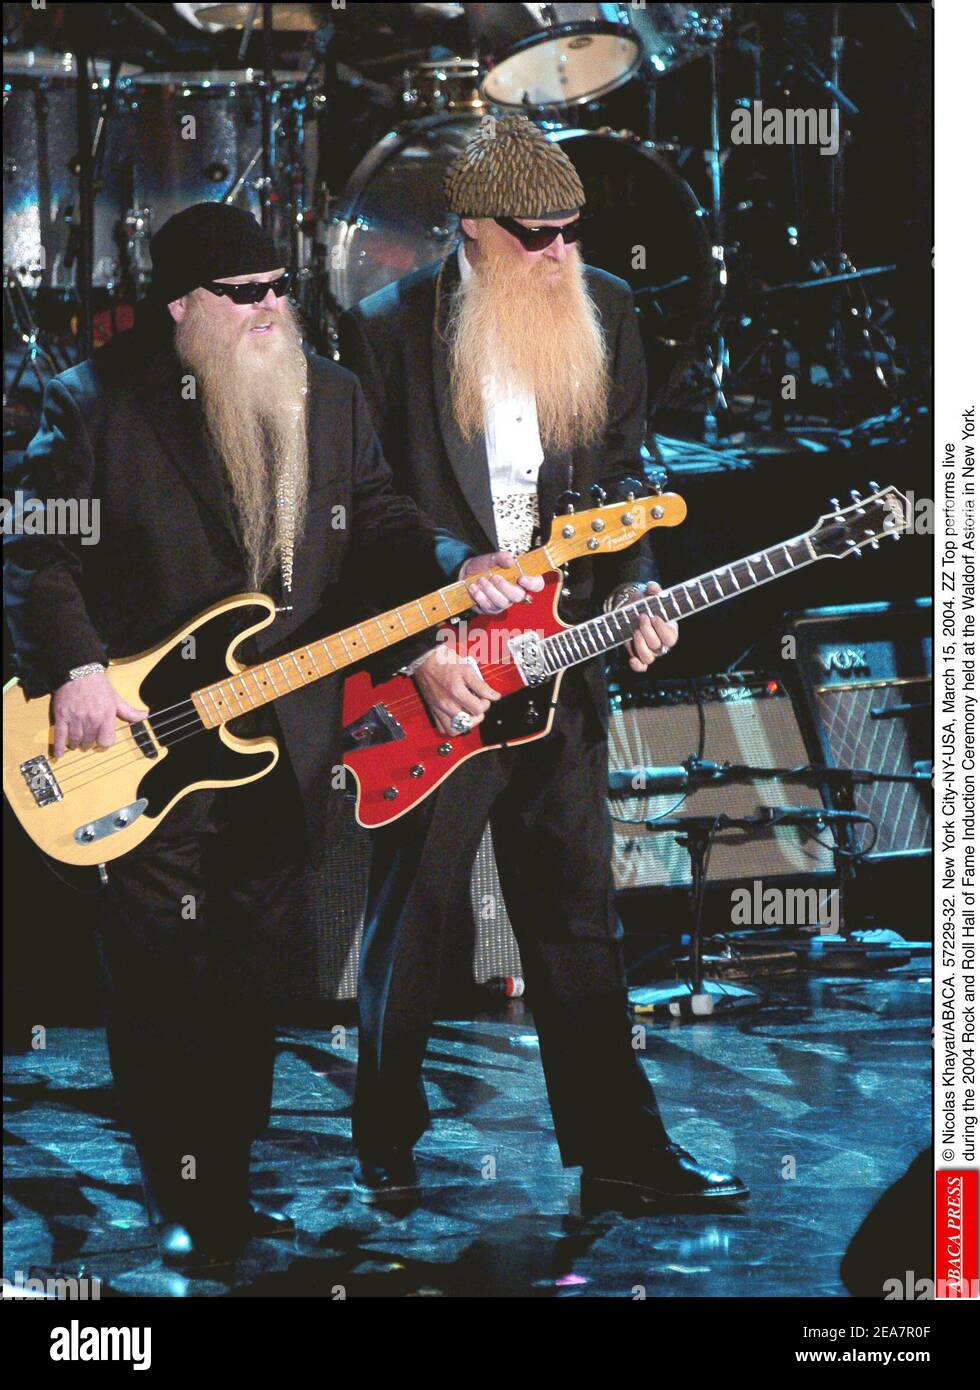 ZZ Top performs live during the 2004 Rock and Roll Hall of Fame Induction  Ceremony held at the Waldorf Astoria in New York, on Monday, March 15,  2004. (Pictured : ZZ Top).